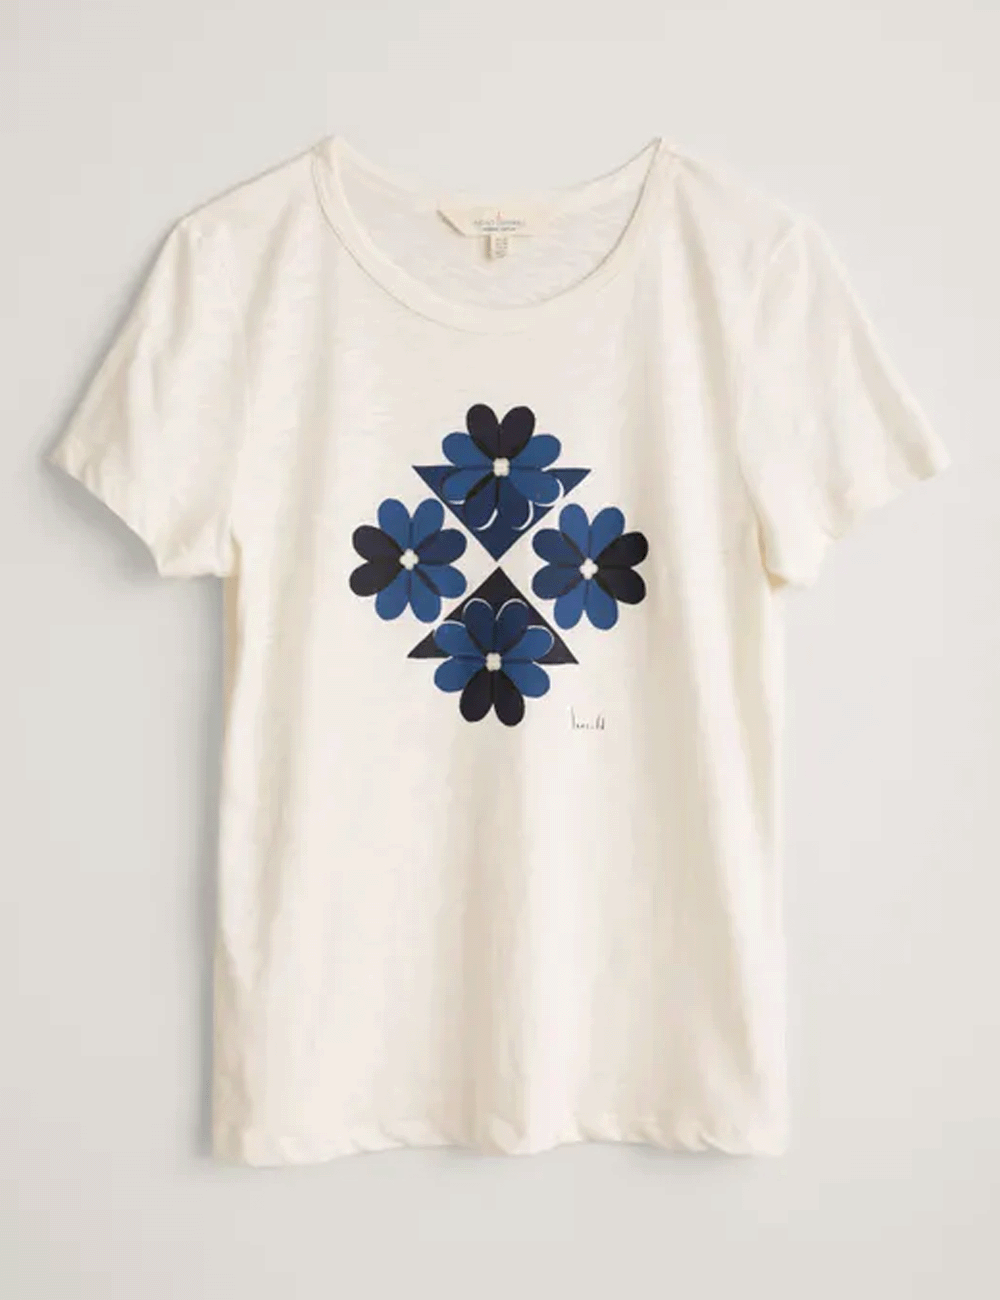 Seasalt's Printing Ink T-Shirt in Tiled Floral Chalk on a grey background